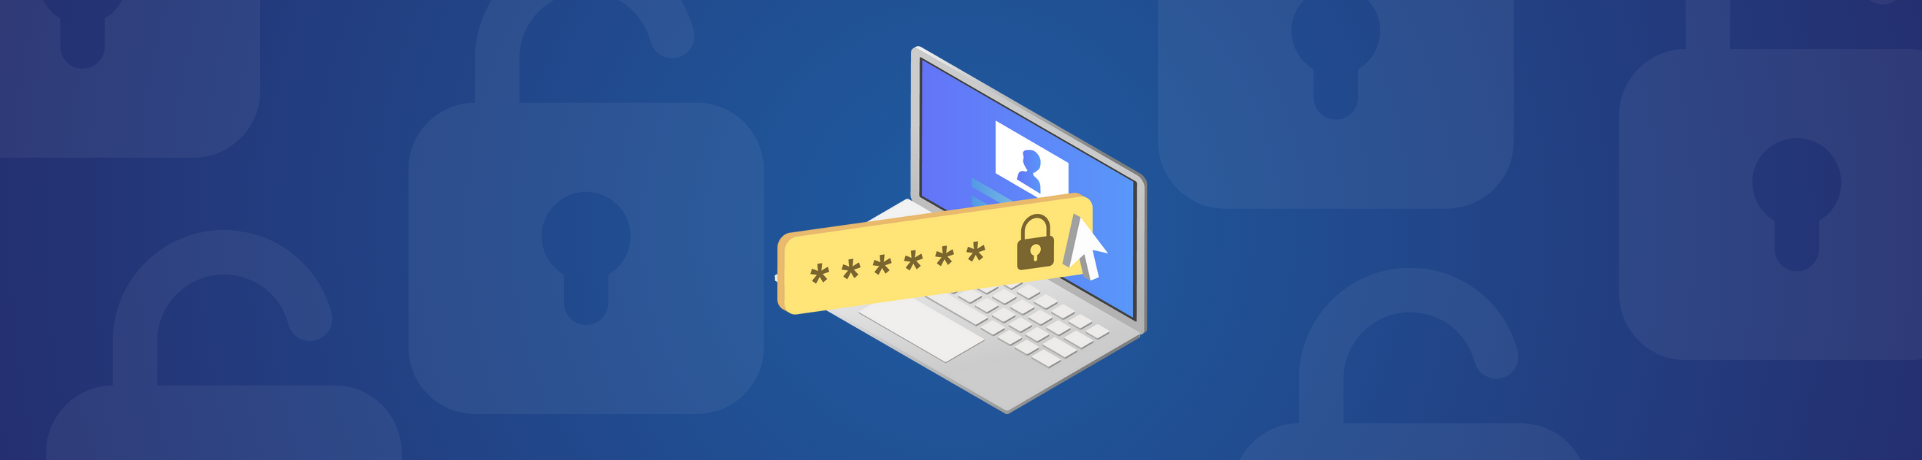 Password manager security featured image